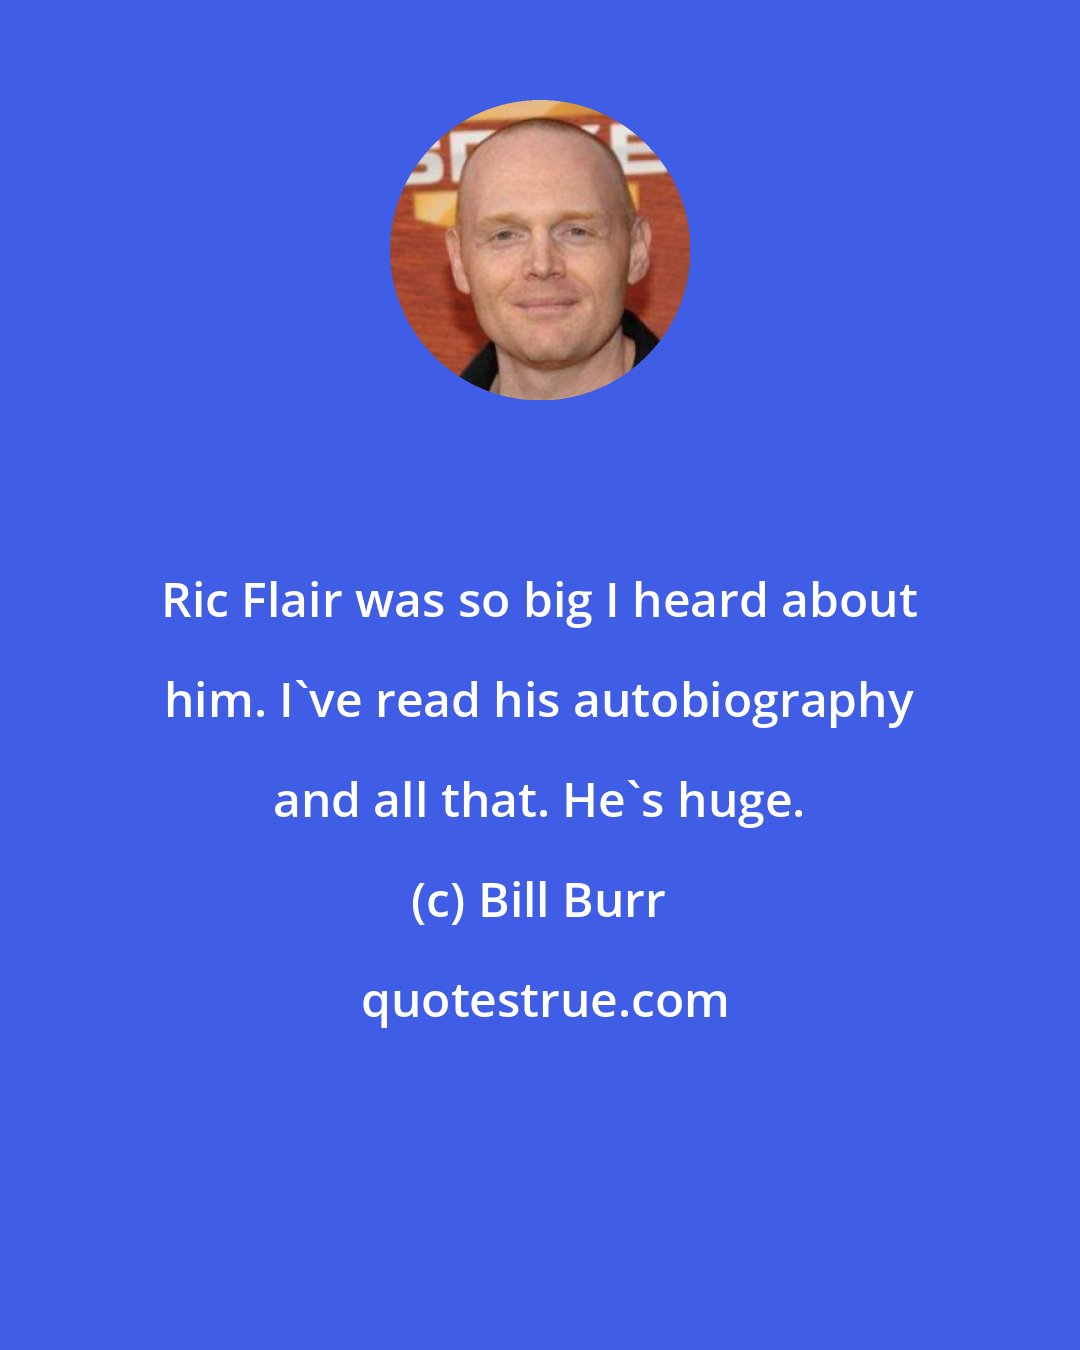 Bill Burr: Ric Flair was so big I heard about him. I've read his autobiography and all that. He's huge.